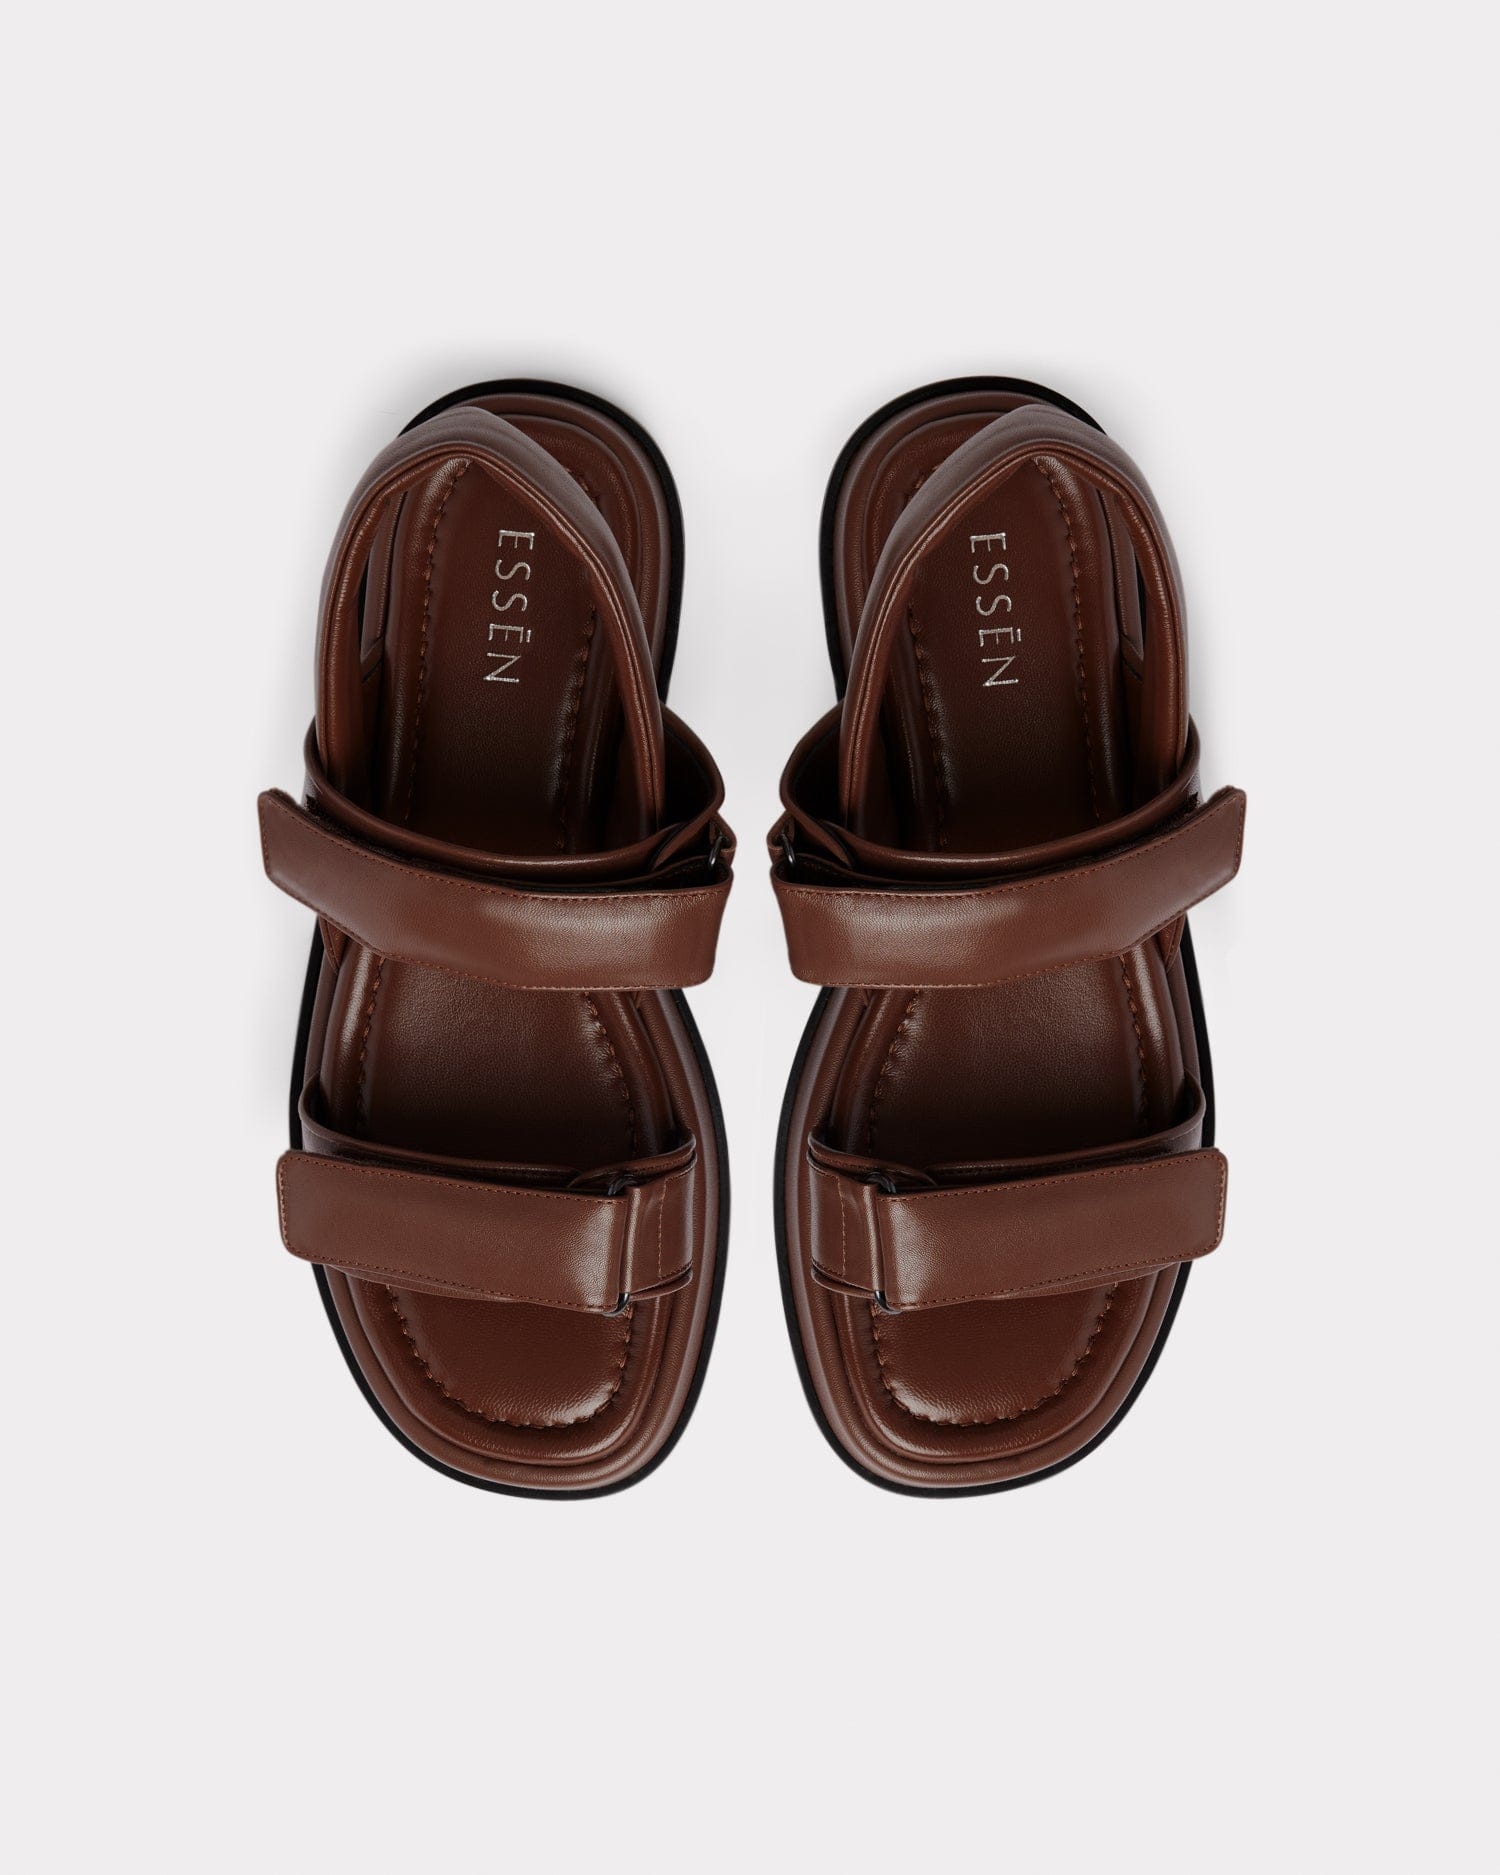 quiet luxury chunky strap sandals in chocolate brown